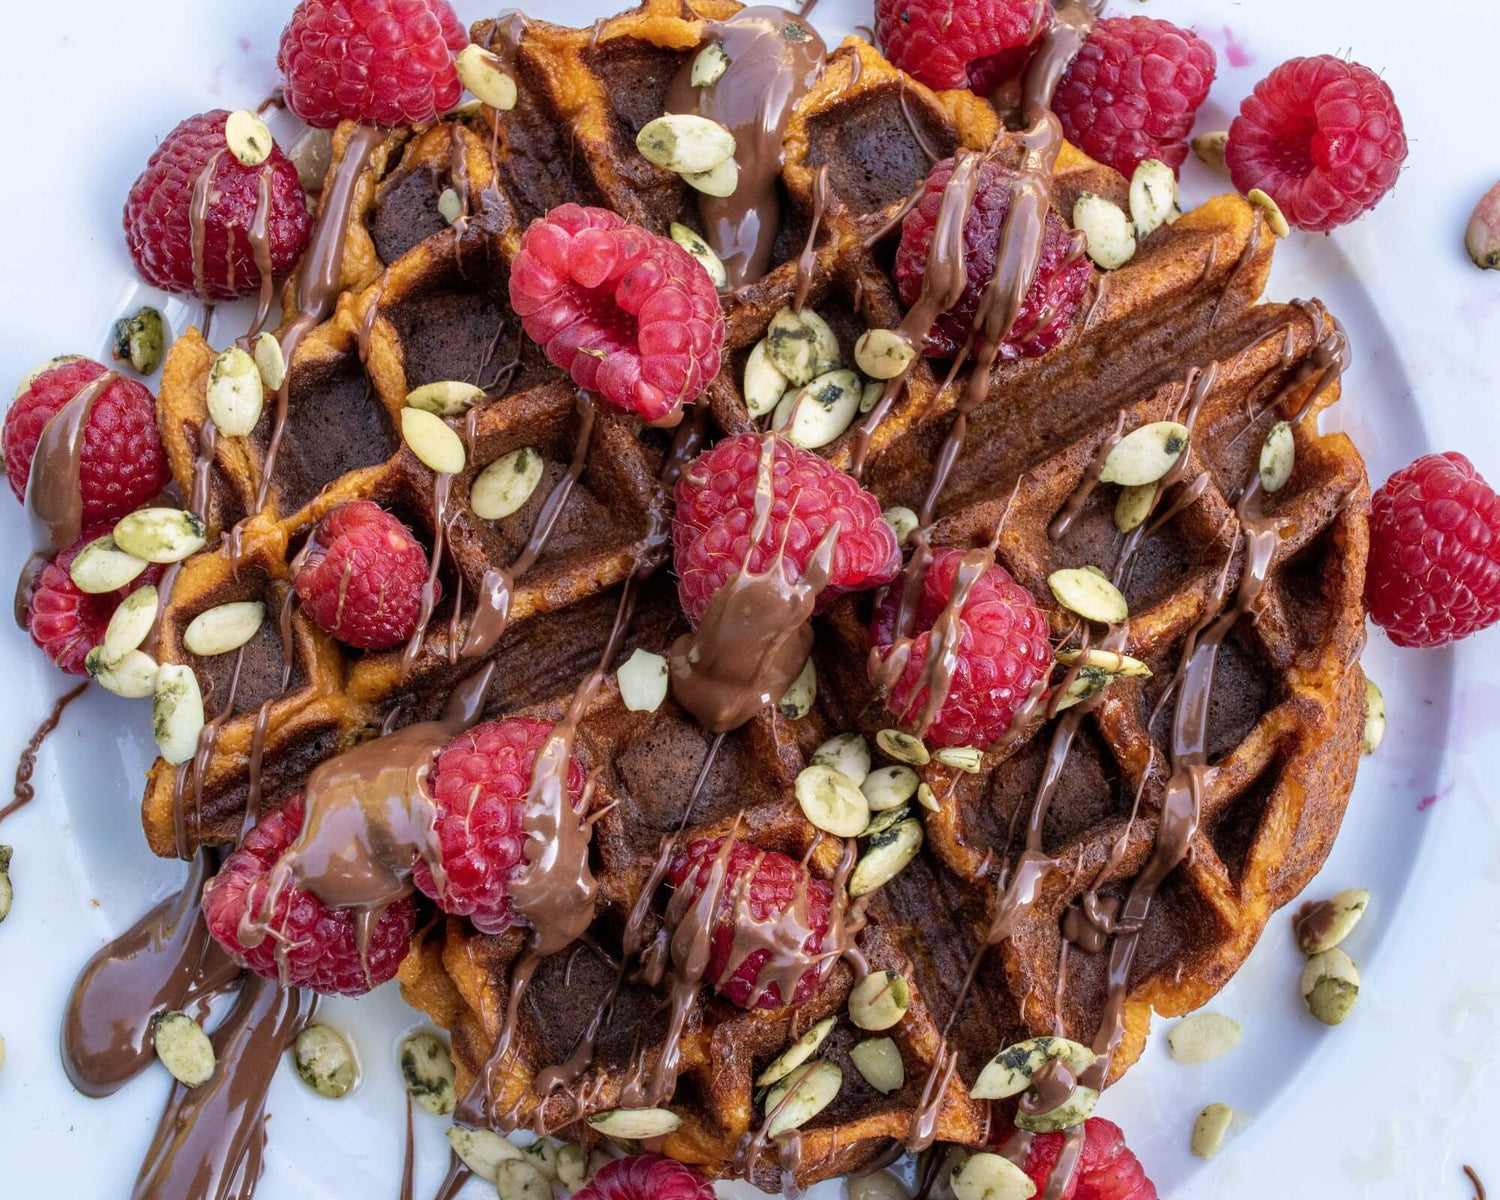 Sweet Potato Waffles topped with raspberries and Nutella